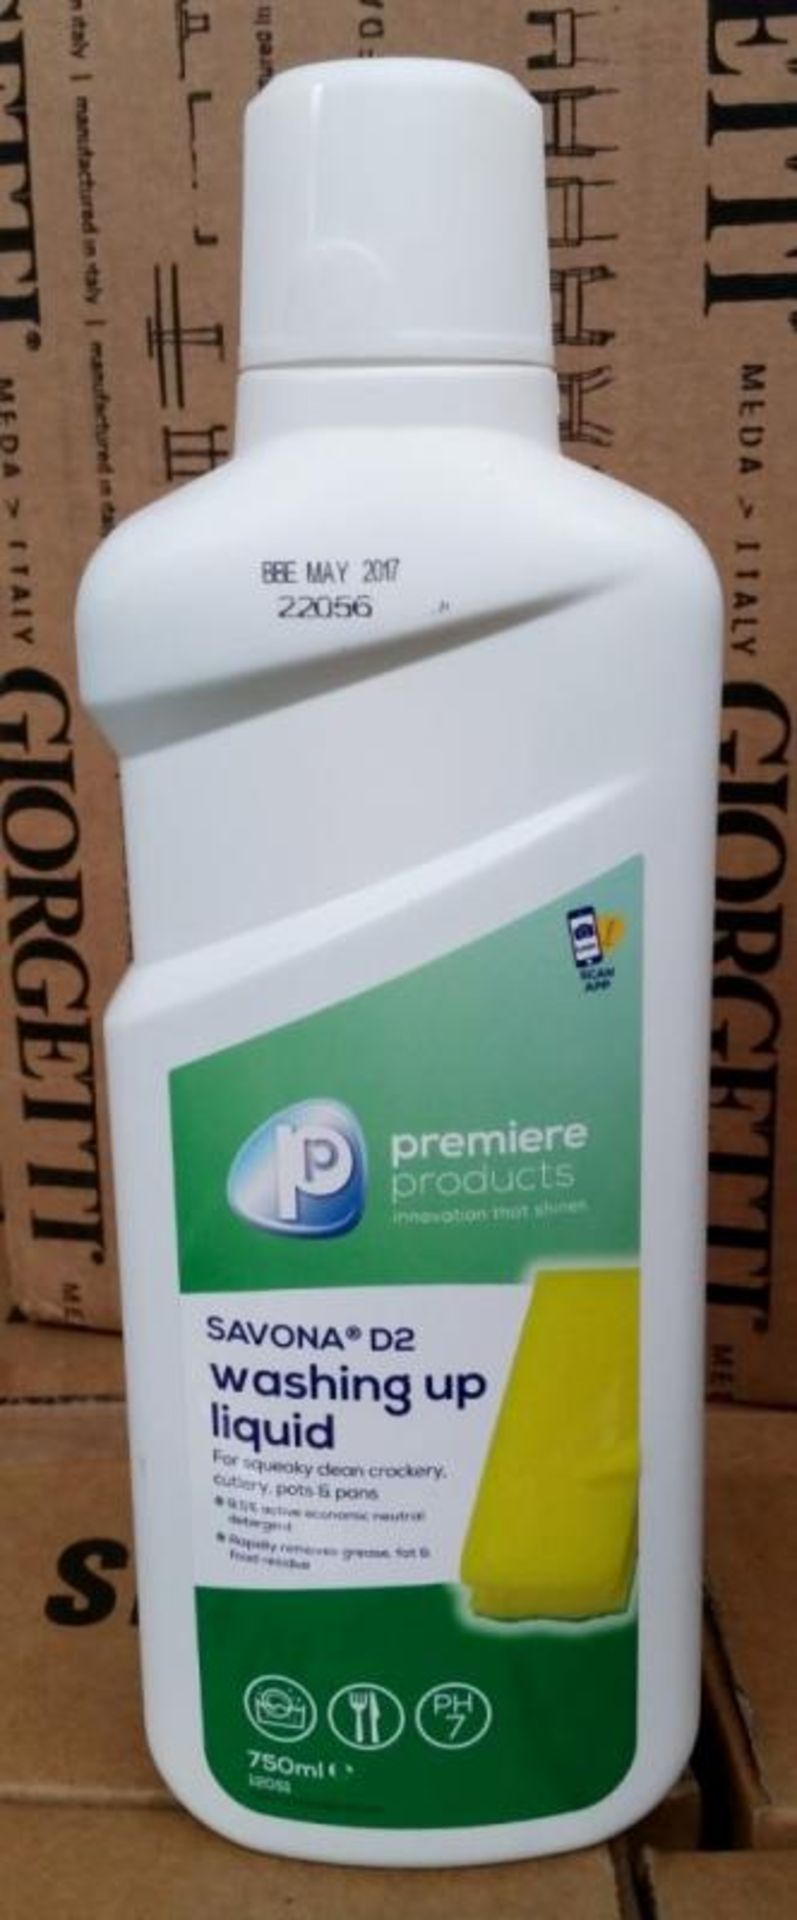 12 x Premiere Products 750ml Savona D2 Washing Up Liquid - For Squeaky Clean Crockery, Cutlery, Pots